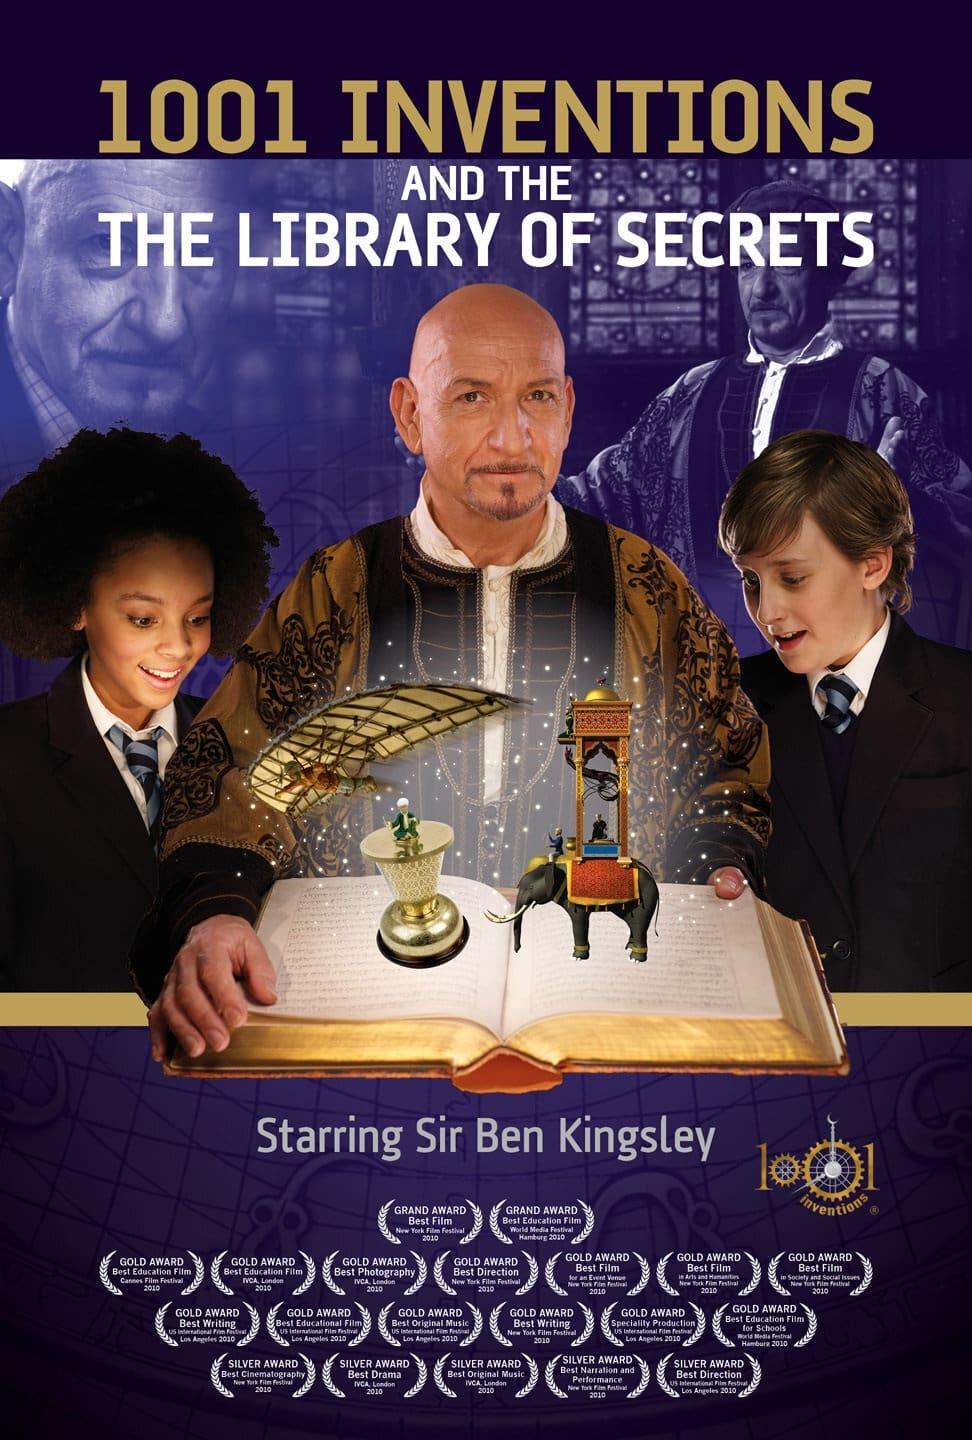 1001 Inventions and the Library of Secrets poster